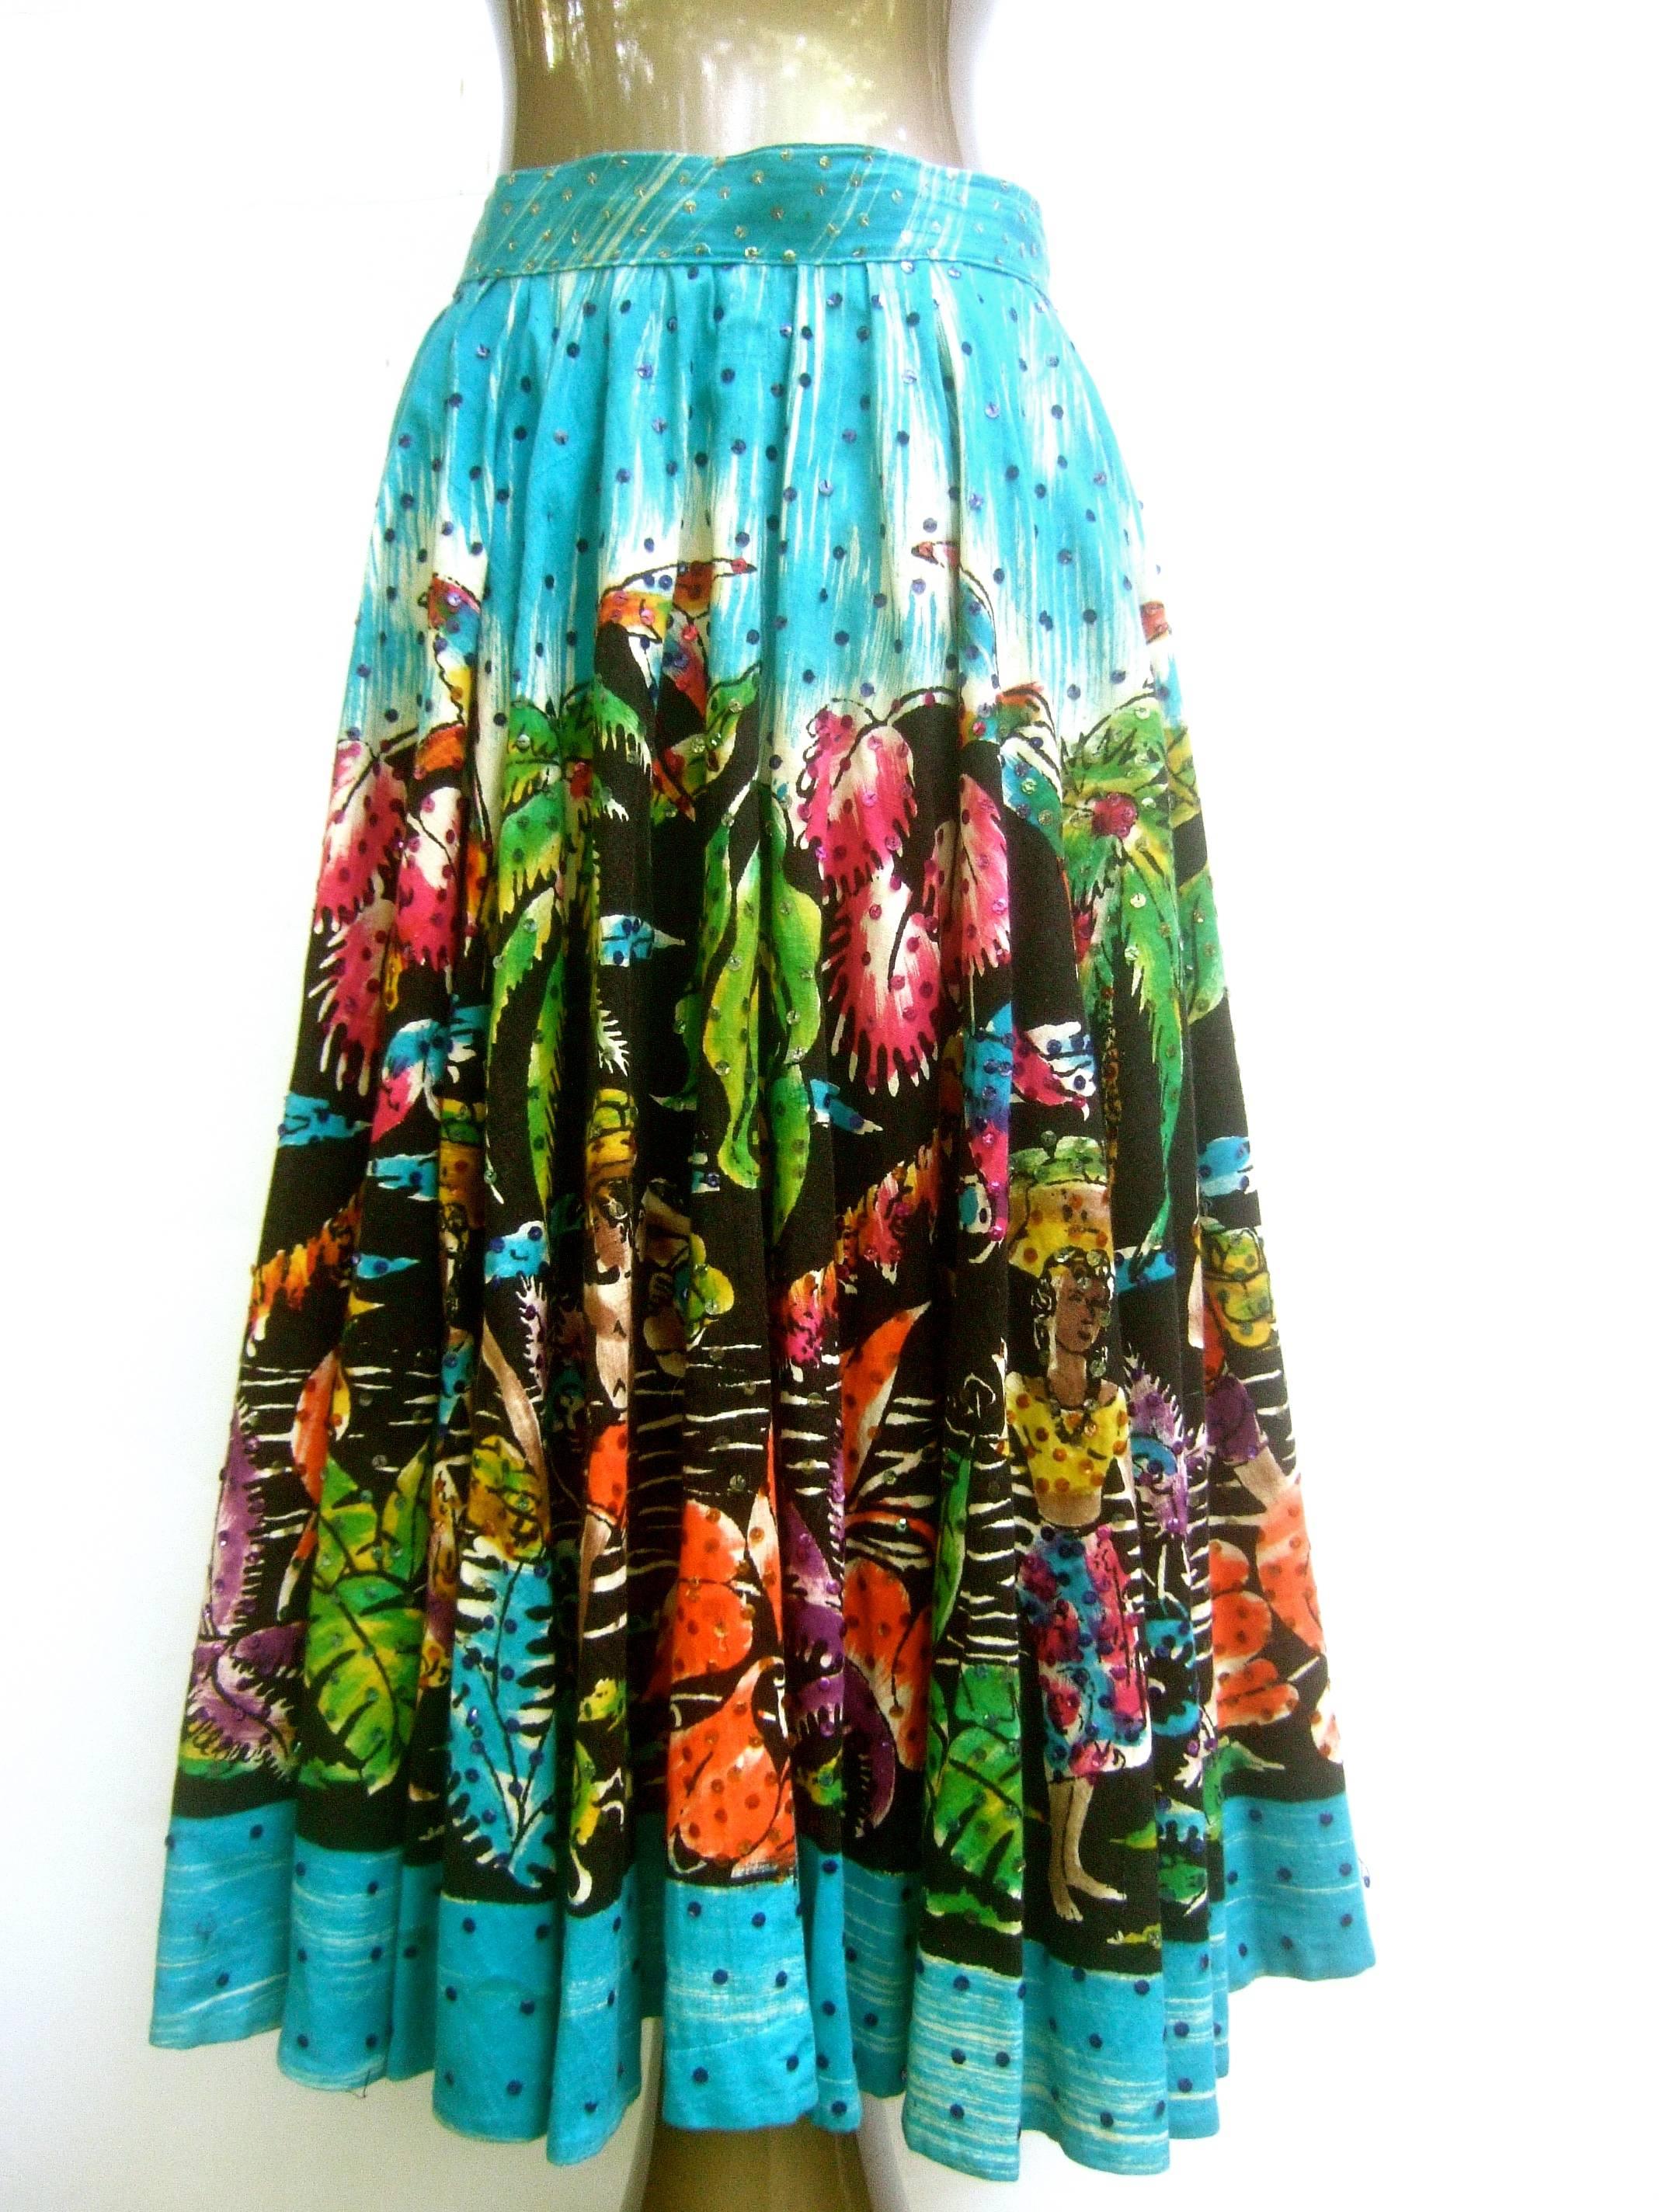 1950s Tropical Polynesian hand painted cotton skirt 
The unique midcentury skirt is illustrated with a vibrant 
hand painted jungle scene with sexy couples, migrant
workers surrounded with lush tropical flowers and foliage 

The figures and